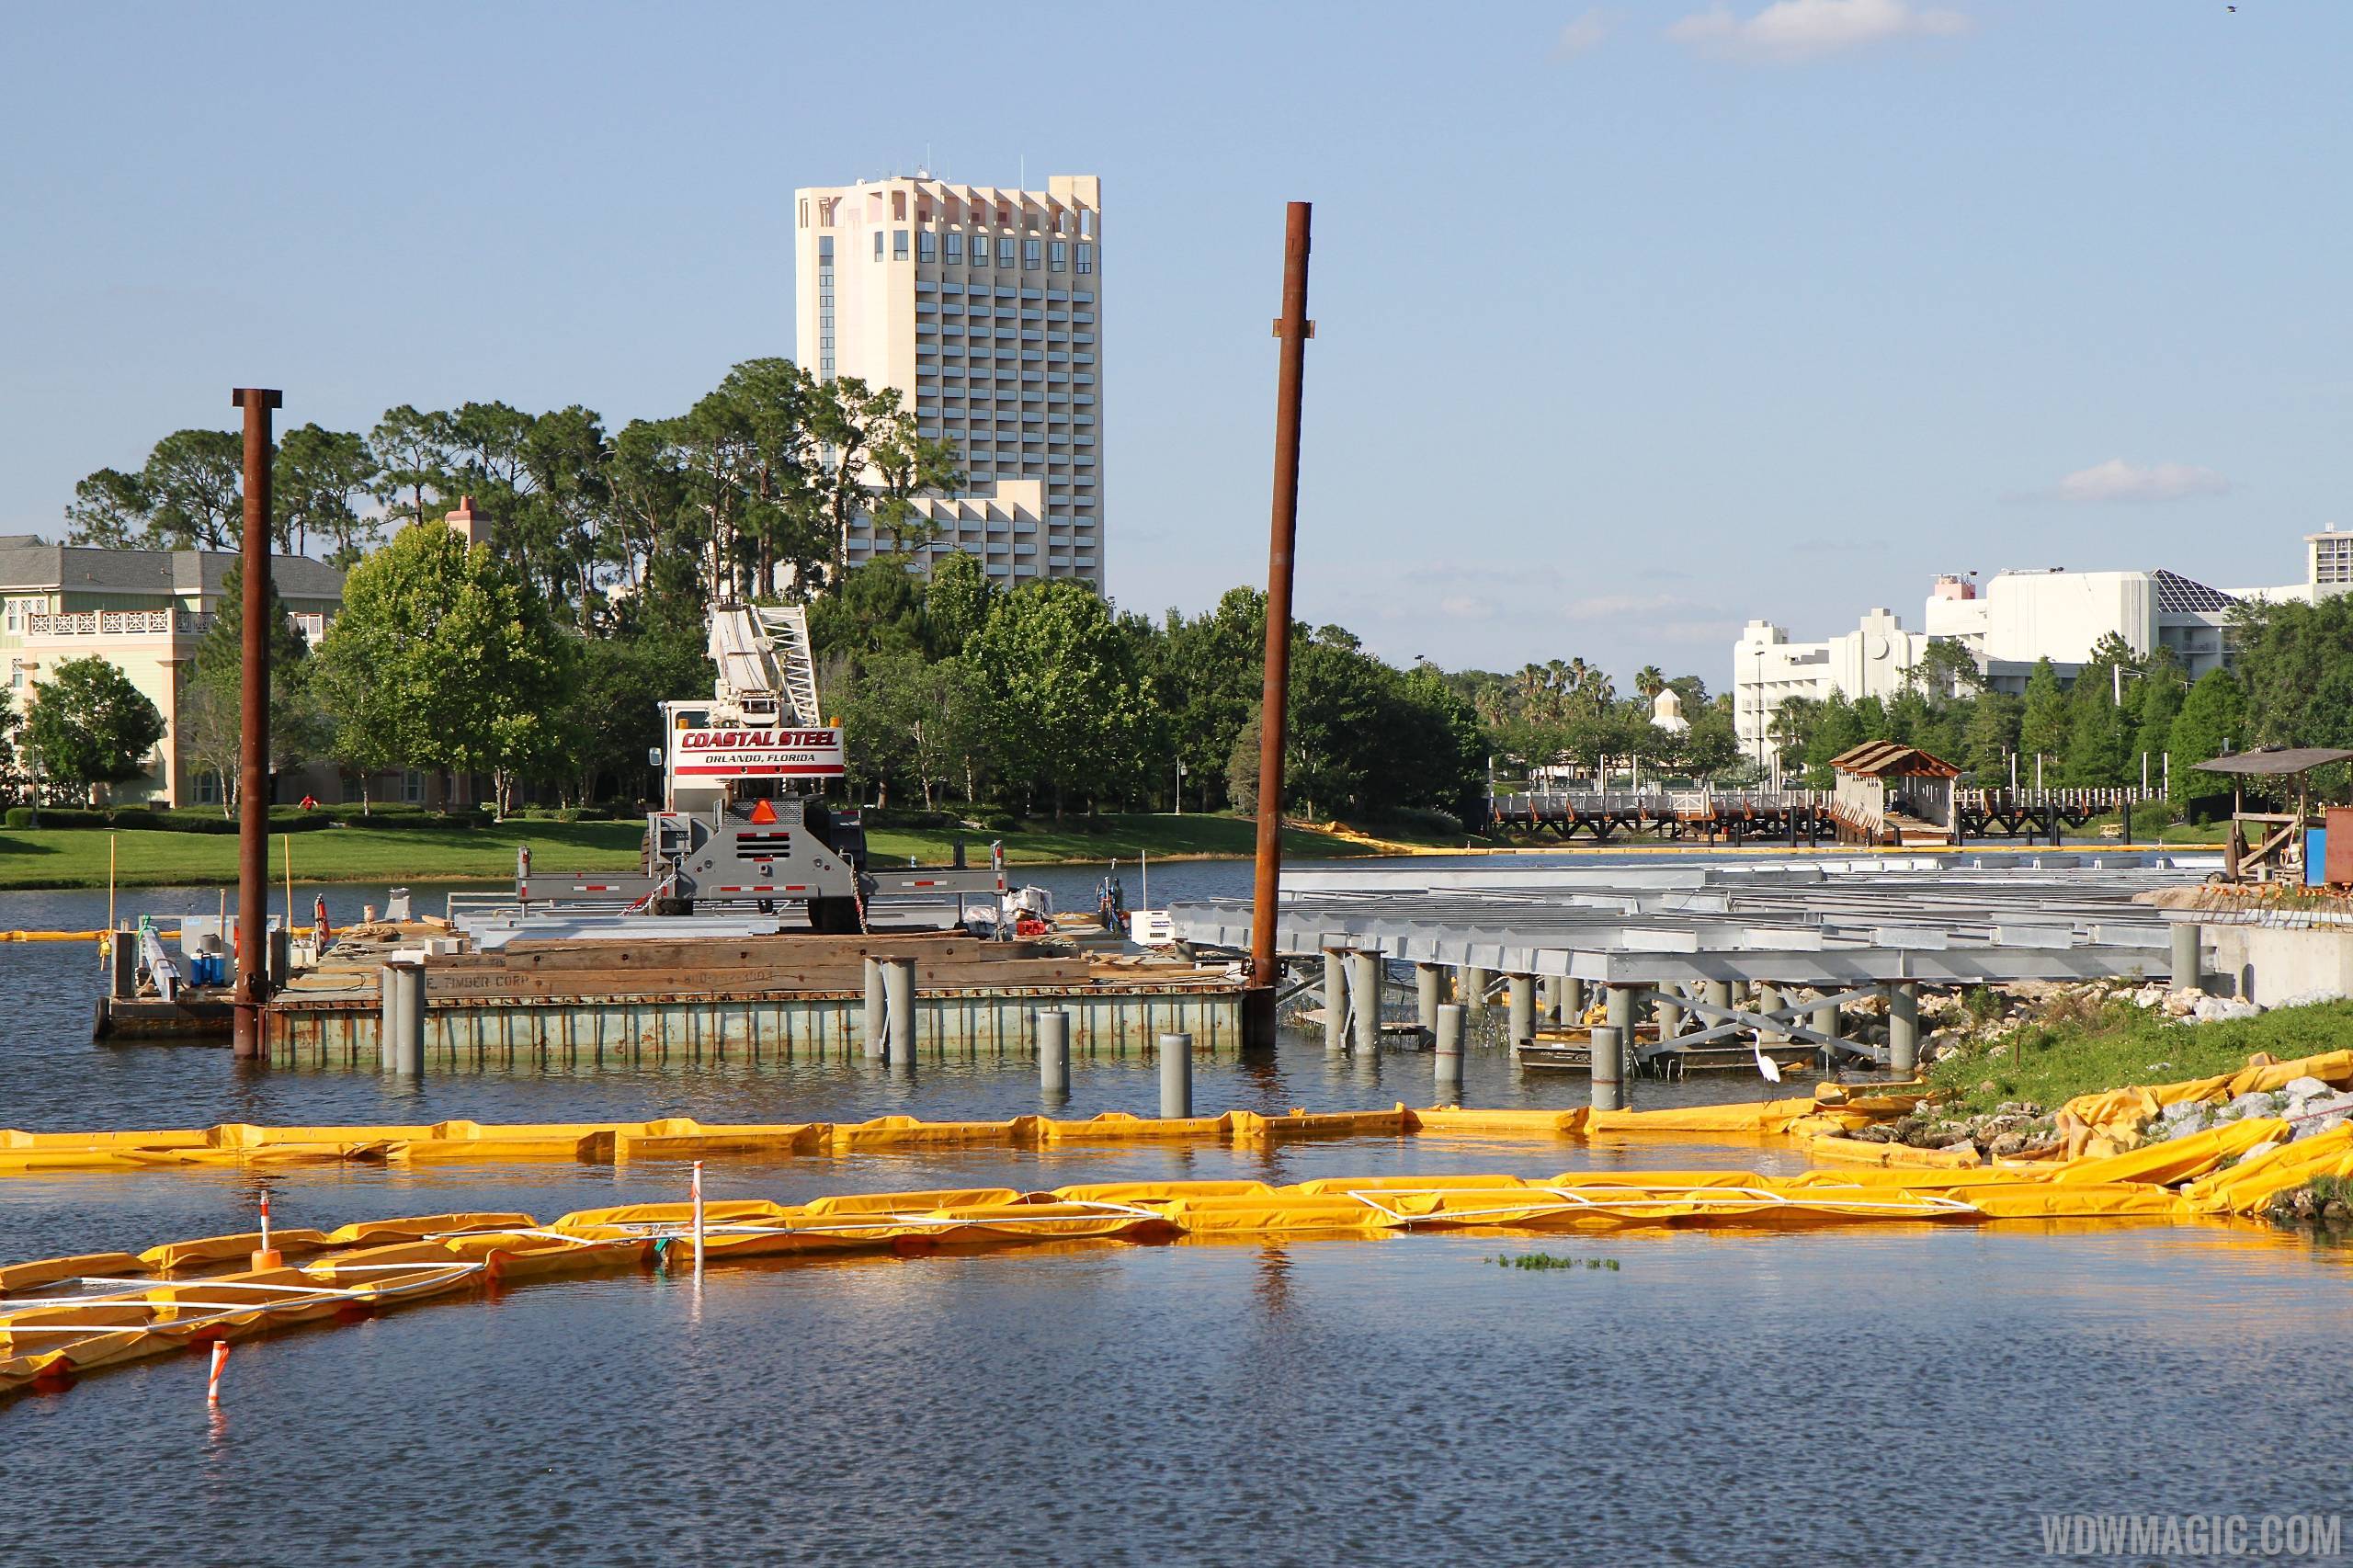 PHOTOS - Foundations taking shape on the Village Lake for The Boathouse restaurant at Disney Springs